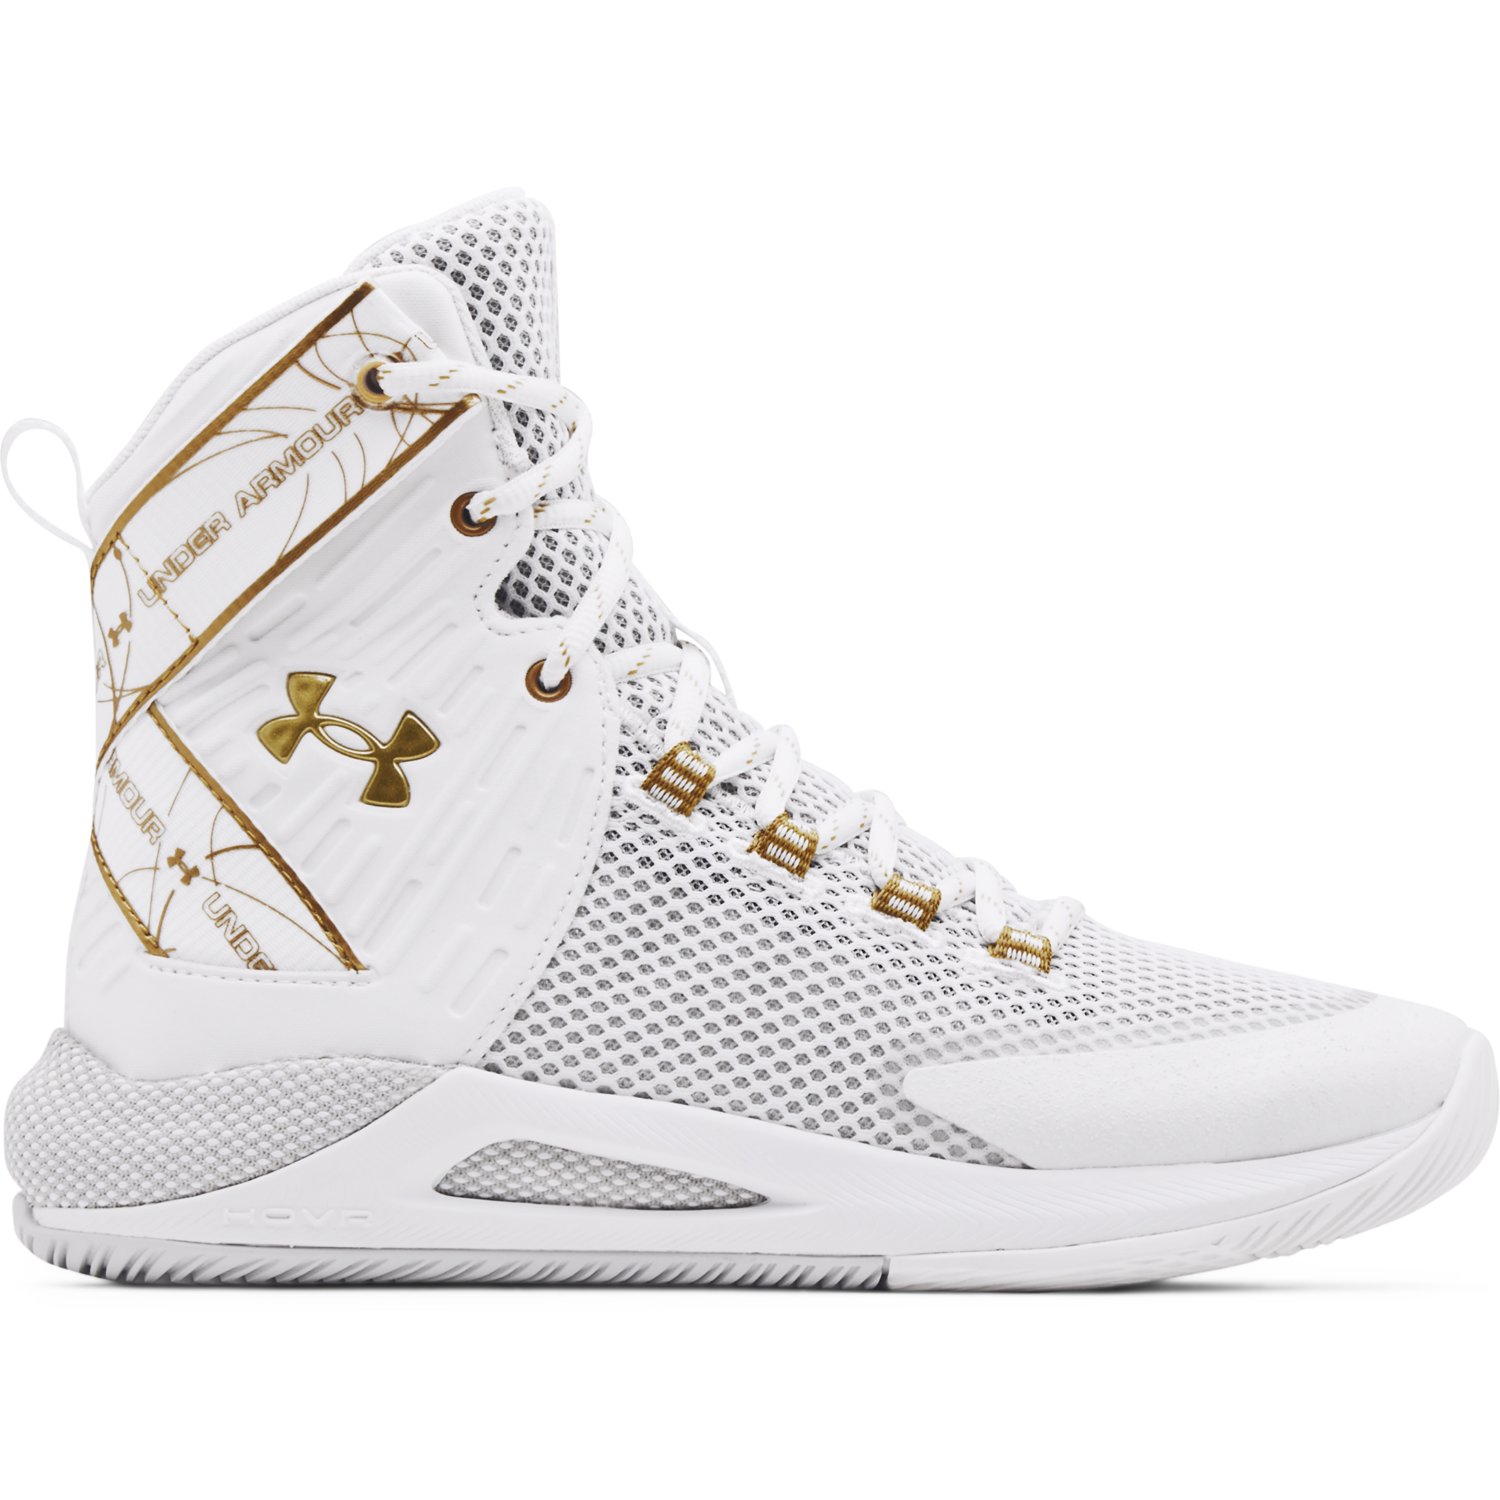 Does Under Armour Make Wrestling Shoes?